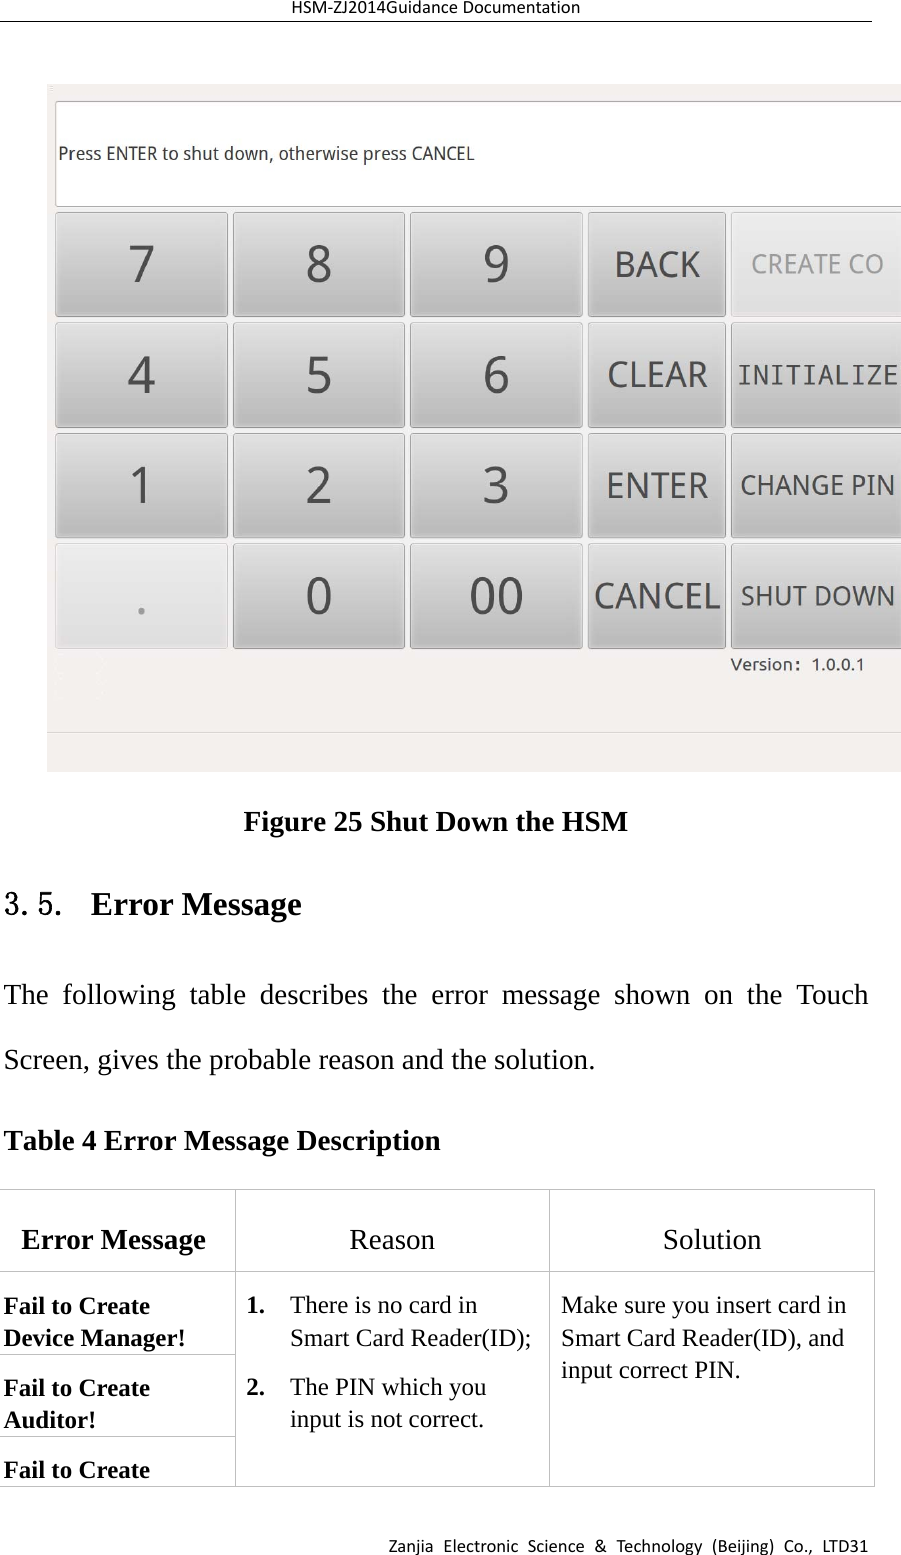 HSM‐ZJ2014GuidanceDocumentationZanjiaElectronicScience&amp;Technology(Beijing)Co.,LTD31 Figure 25 Shut Down the HSM 3.5. Error Message The following table describes the error message shown on the Touch Screen, gives the probable reason and the solution. Table 4 Error Message Description Error Message  Reason Solution Fail to Create Device Manager!  1. There is no card in Smart Card Reader(ID);2. The PIN which you input is not correct. Make sure you insert card in Smart Card Reader(ID), and input correct PIN. Fail to Create Auditor! Fail to Create 